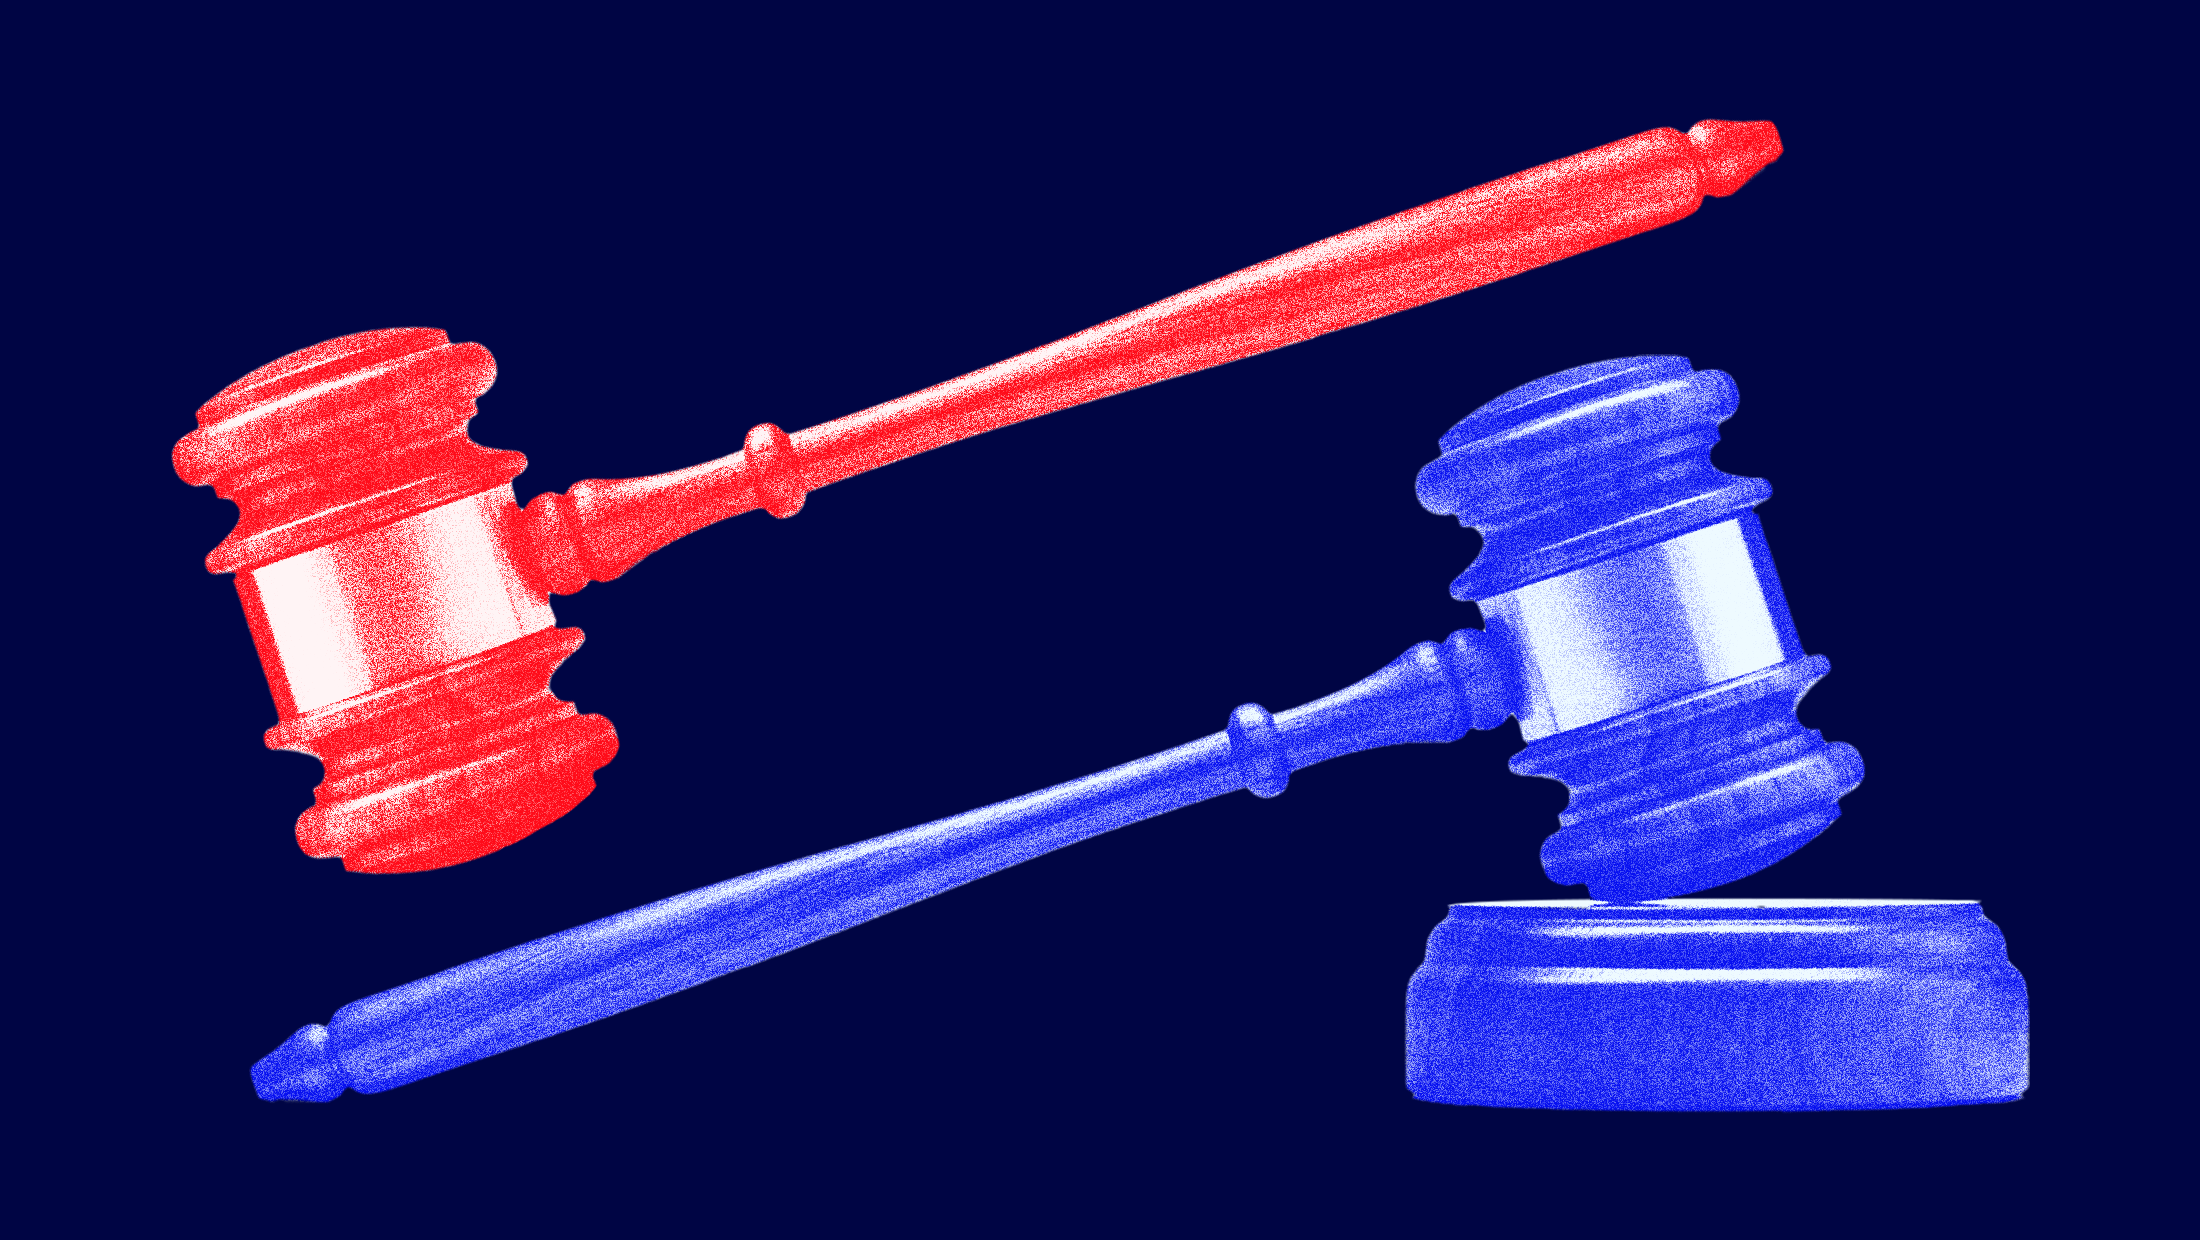 A red-toned gavel on top of a blue-toned gavel. The gavels are pointing in opposite directions.